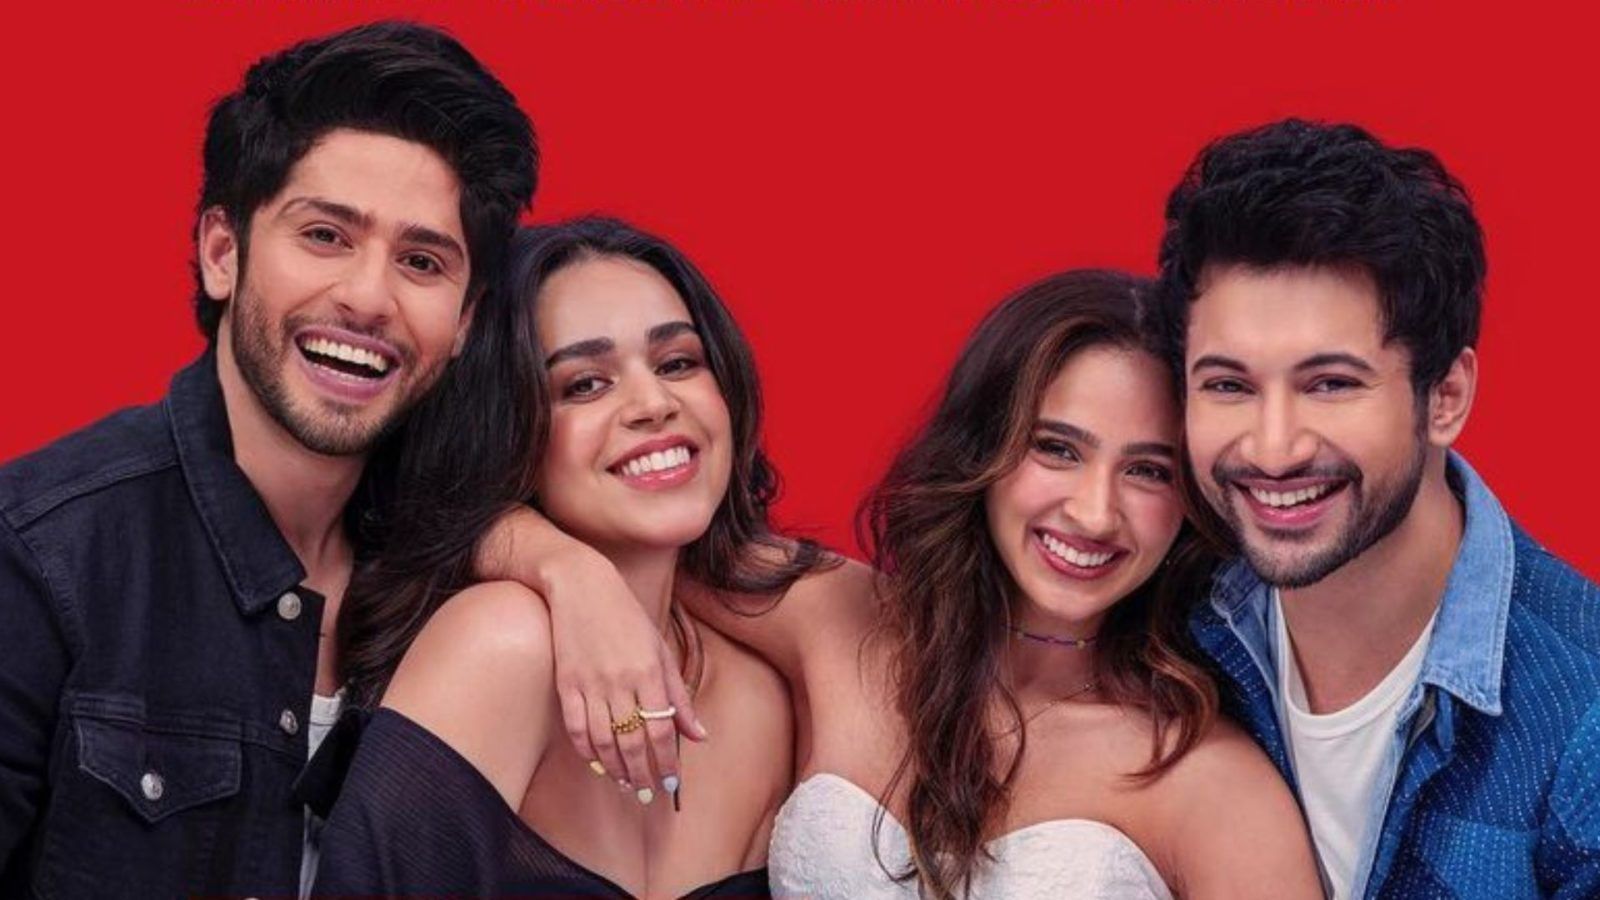 Ishq Vishk sequel to give romance an upgrade with next-gen stars in 2023